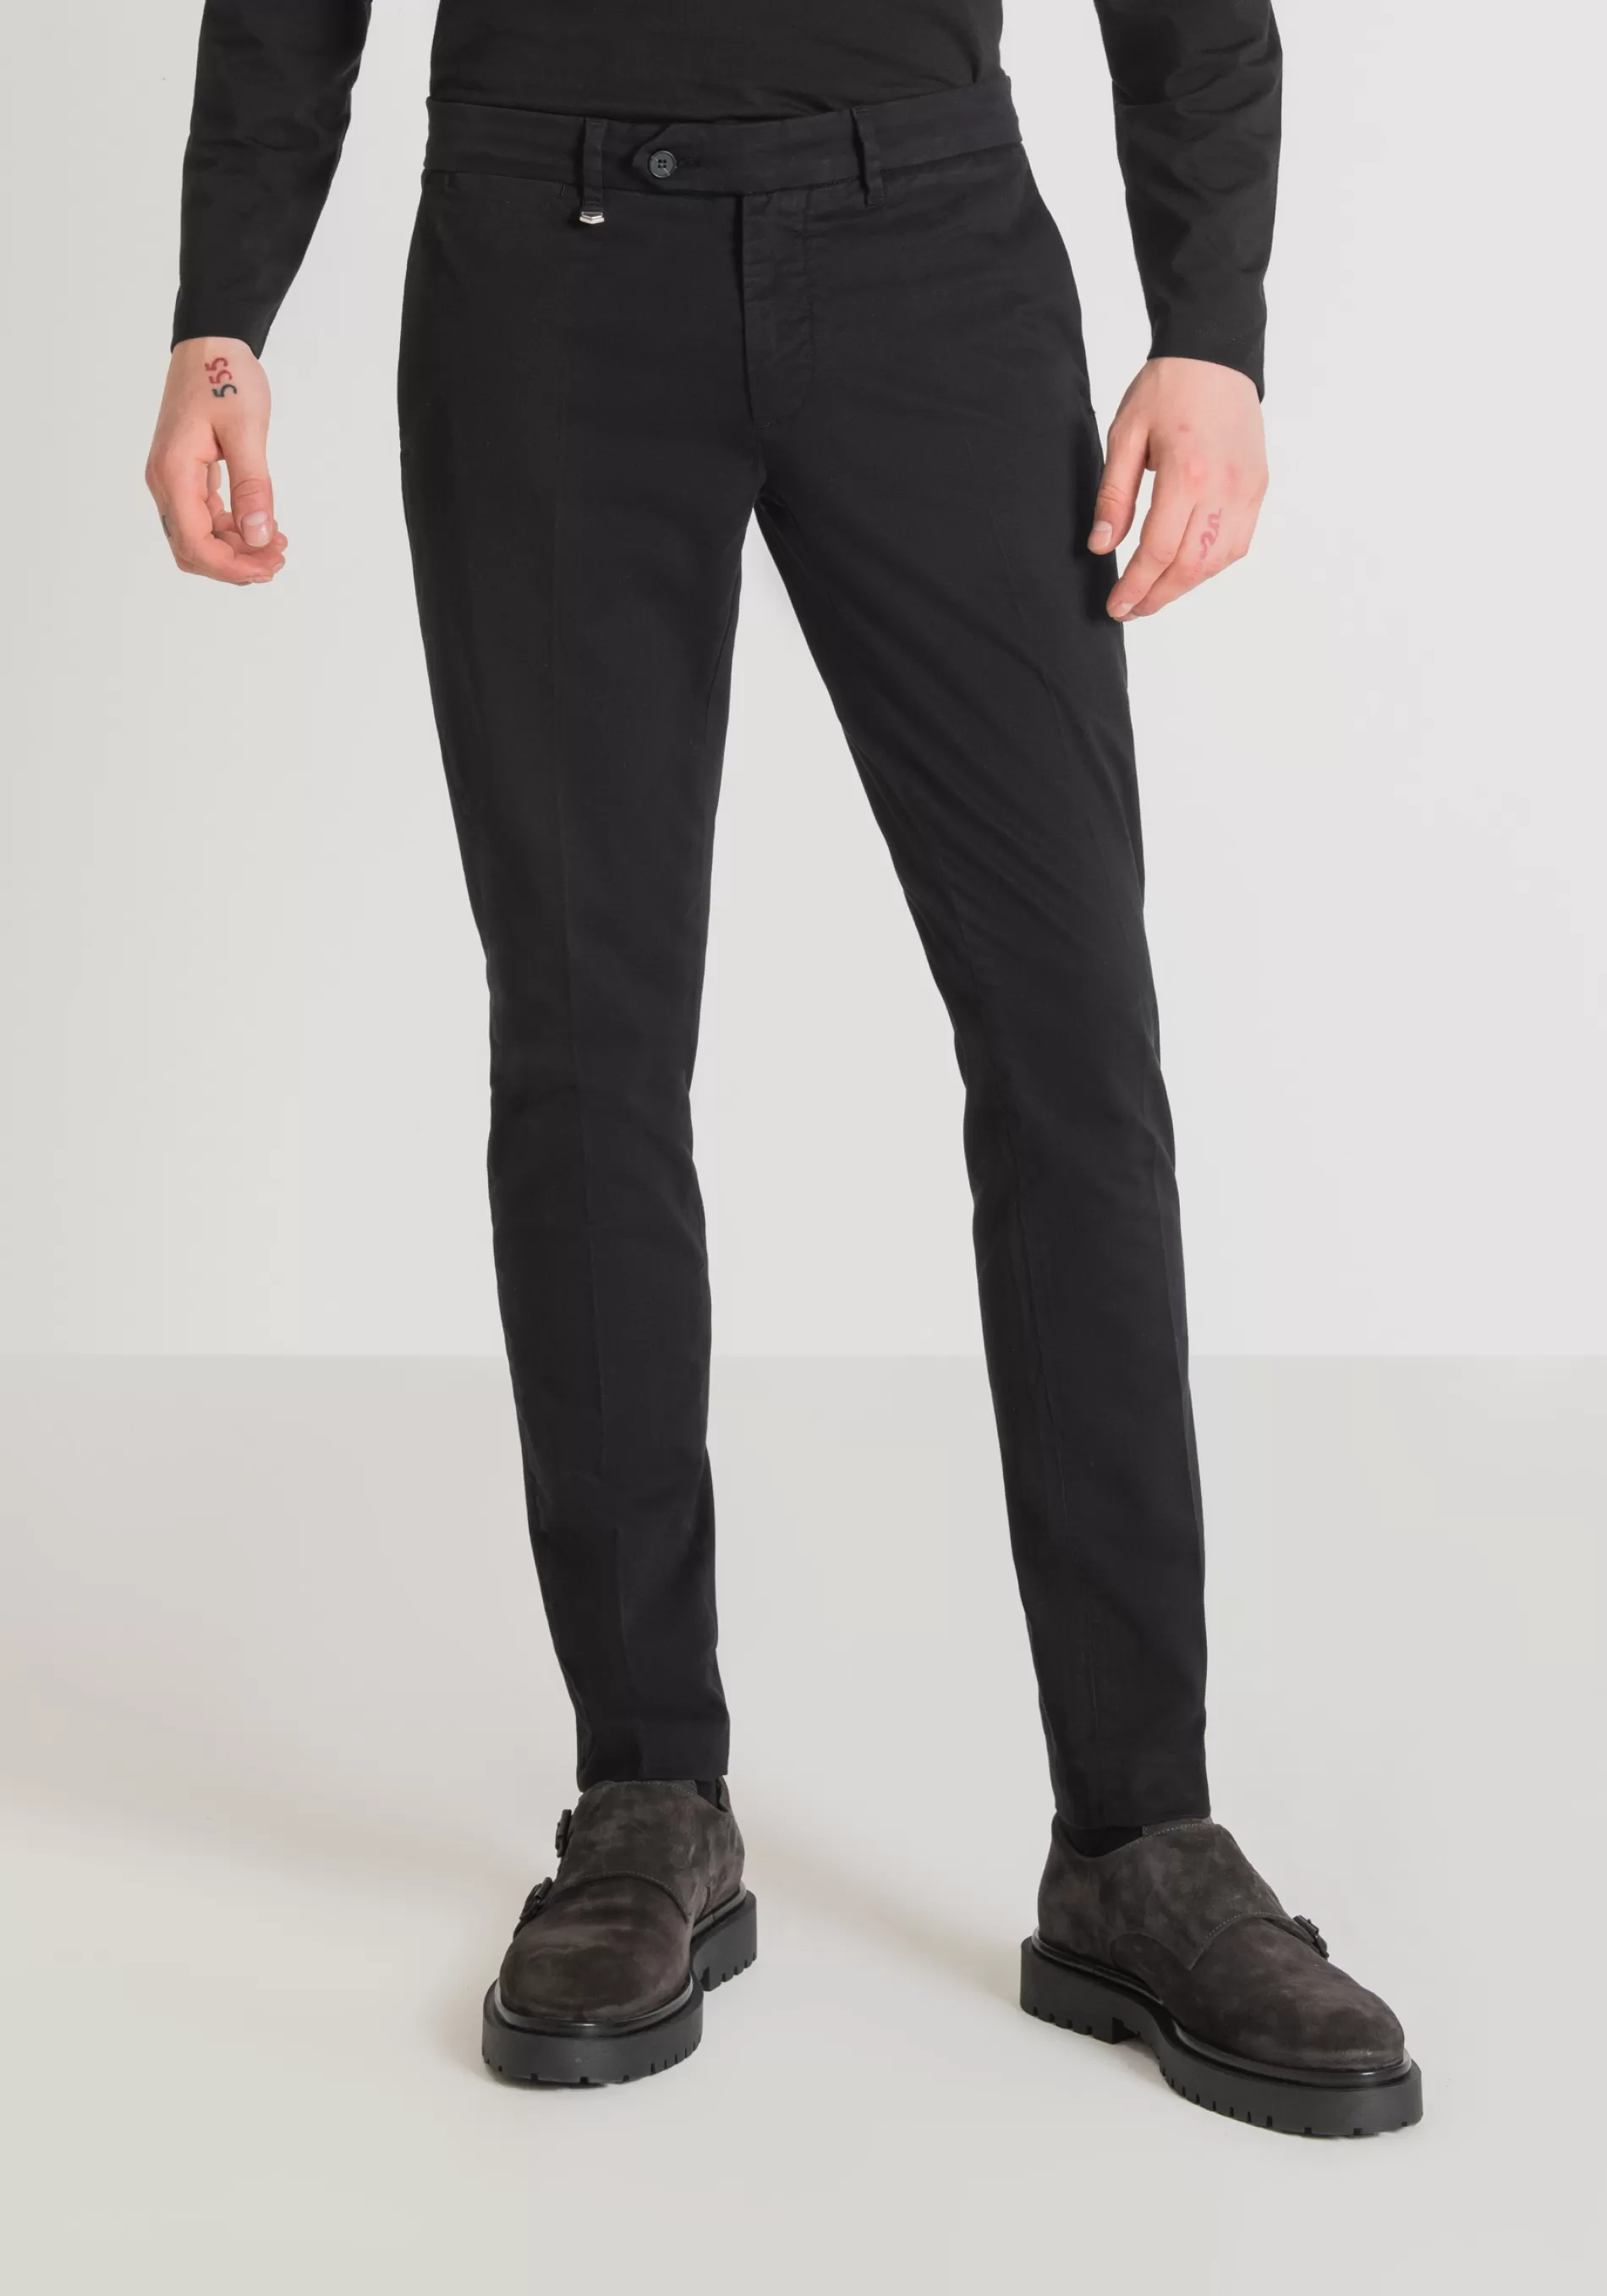 Best Sale "BRYAN" SKINNY FIT TROUSERS IN SOFT MICRO-WEAVE STRETCH COTTON Trousers